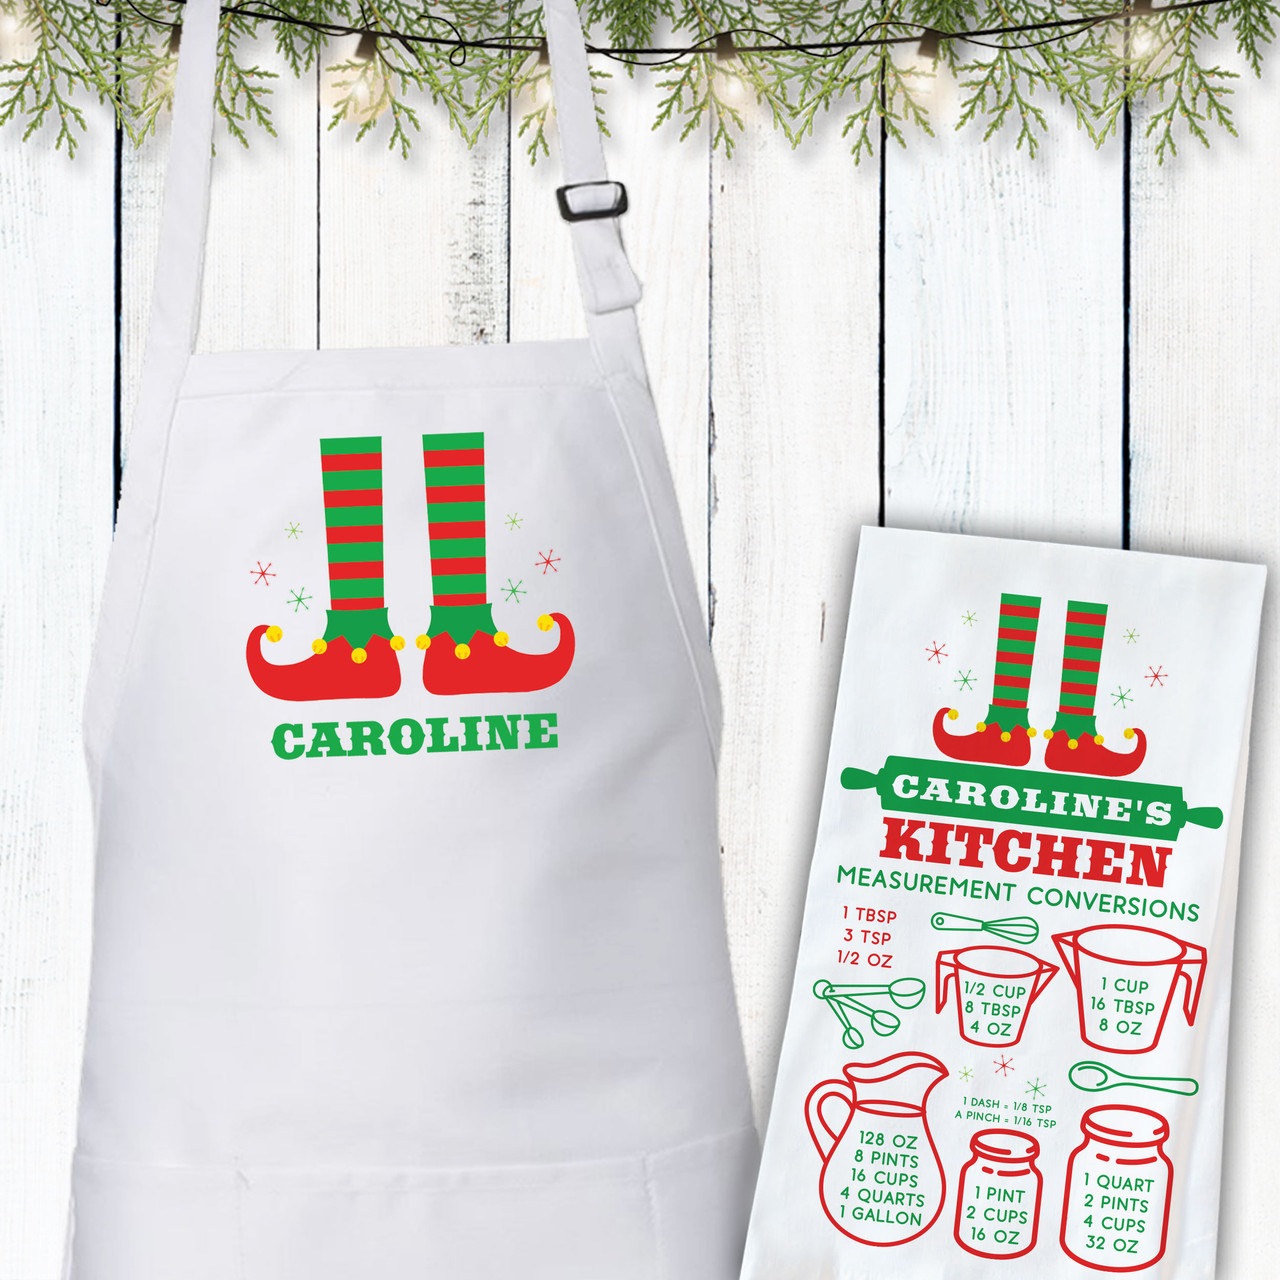 https://cdn11.bigcommerce.com/s-5grzuu6/images/stencil/1280x1280/products/4388/50548/Elf-Feet_Personalized-Christmas_Apron-and-Tea_Towel__16968.1688151857.jpg?c=2